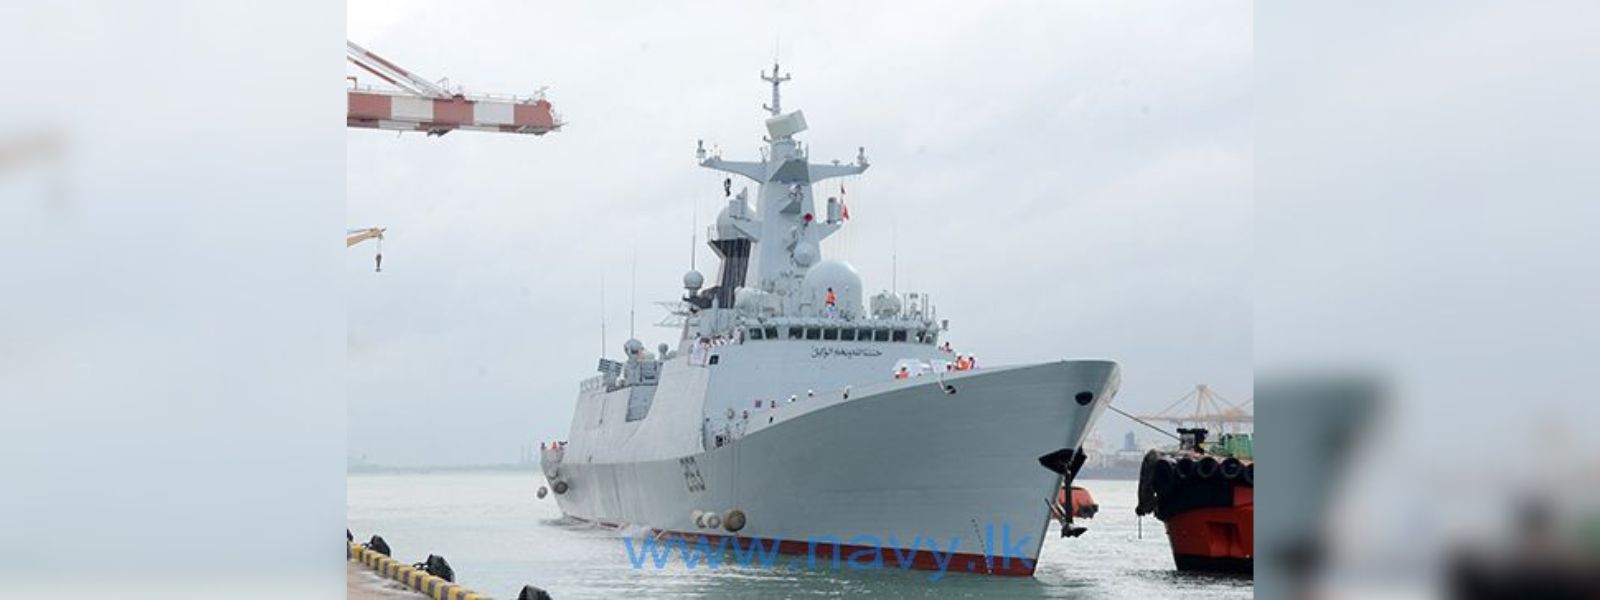 PNS ‘Tippu Sultan’ arrives at port of Colombo